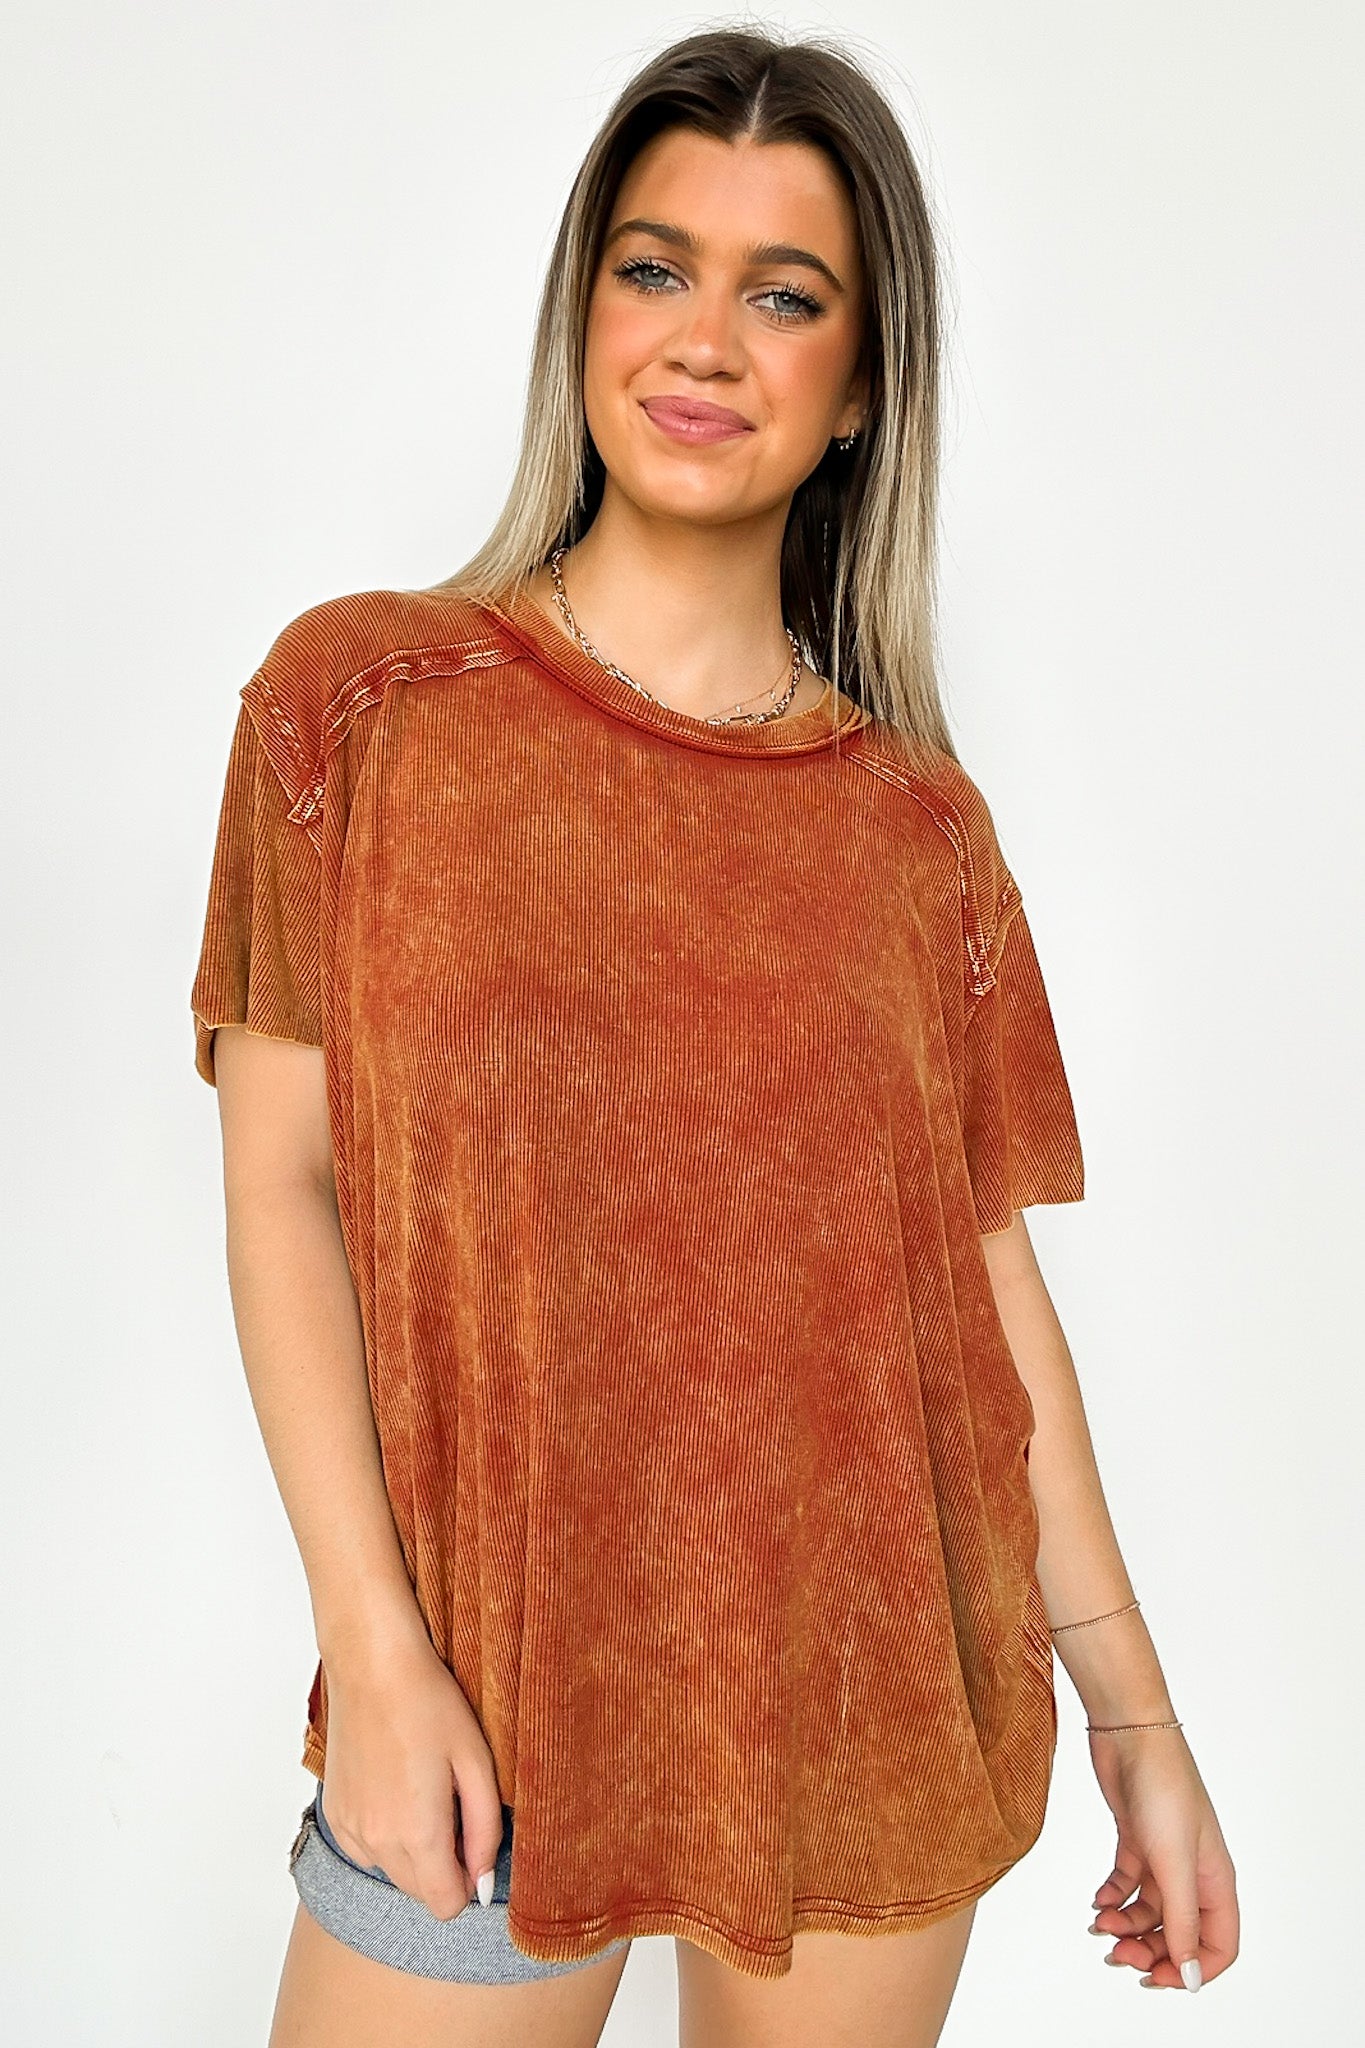 Mirissa Mineral Washed Boat Neck Top - BACK IN STOCK